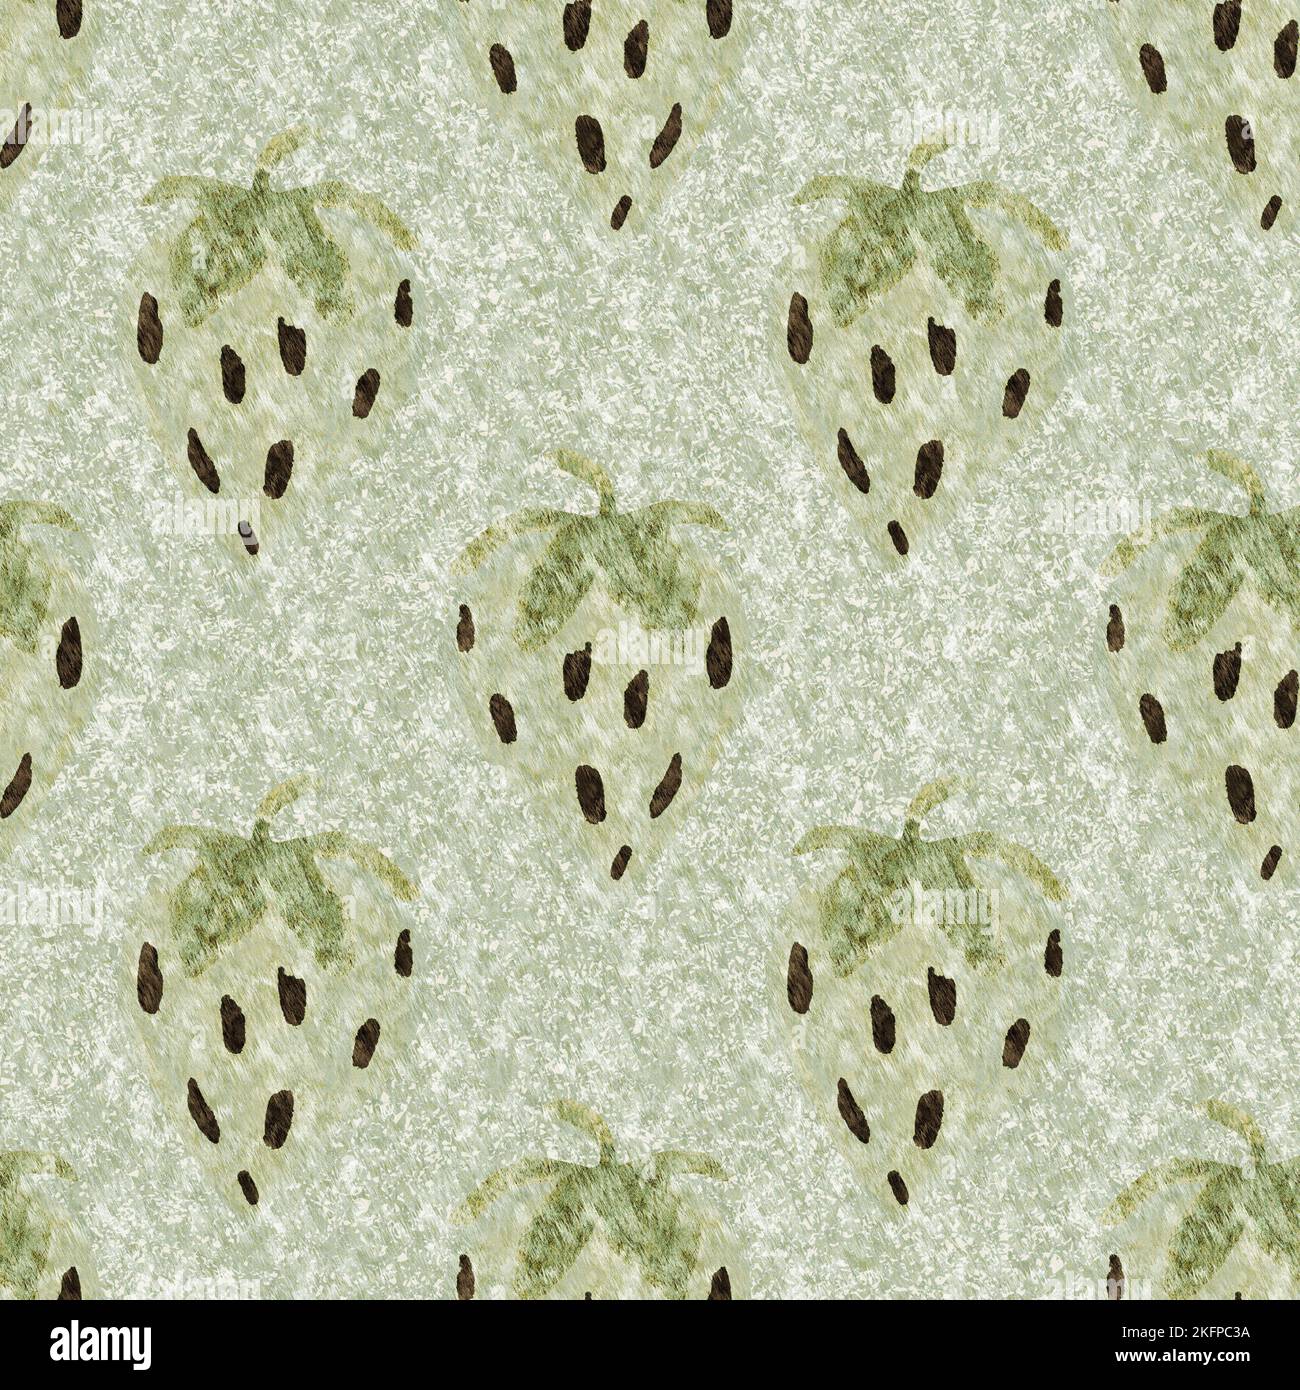 https://c8.alamy.com/comp/2KFPC3A/green-marl-strawberry-vintage-seamless-pattern-cottagecore-linen-retro-summer-fruit-wallpaper-whimsical-sweet-healthy-berry-background-2KFPC3A.jpg